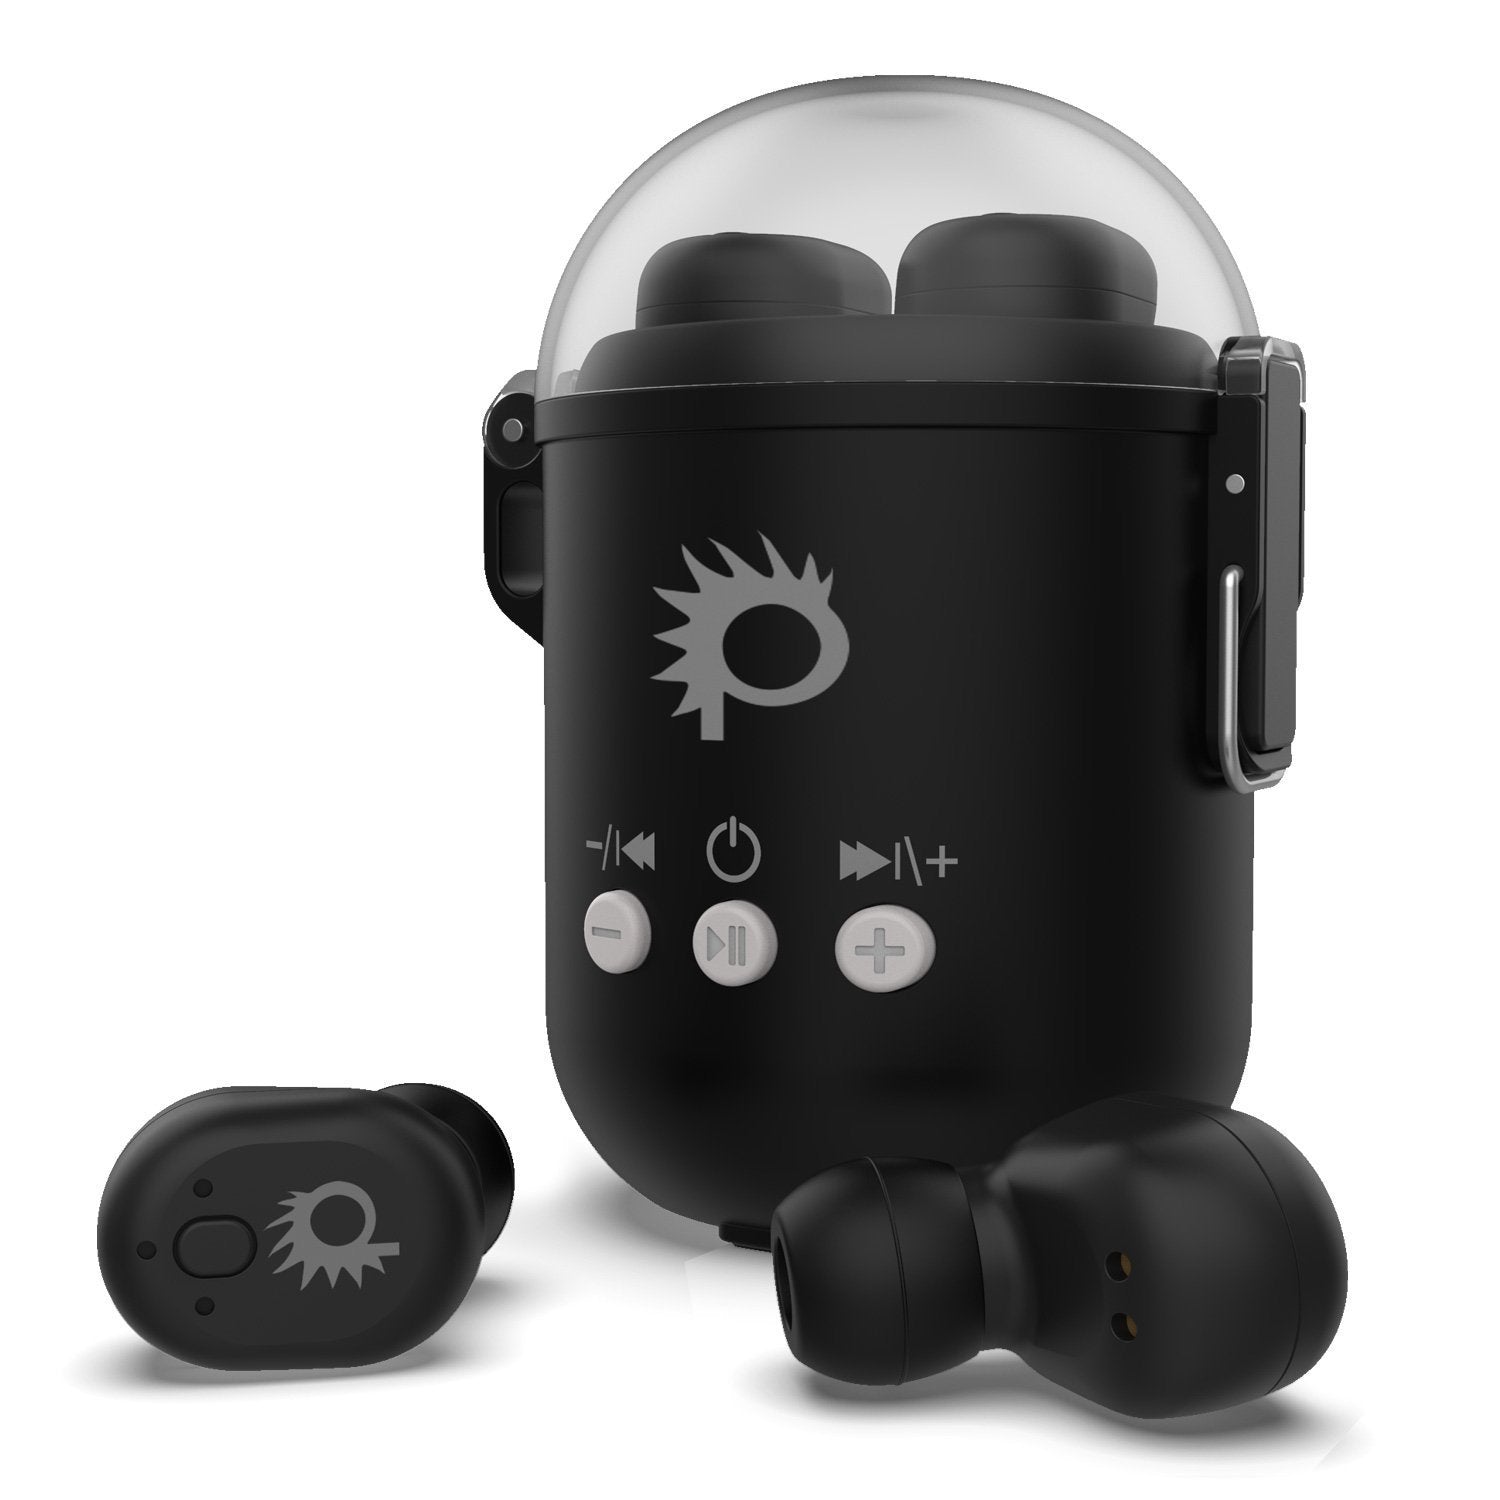 PunkBuds Capsule True Wireless Bluetooth Earbuds W/Noise Cancelling Mic IP67 Waterproof Storage & Fast Charger Case W/Built-In Speaker, Reliable Bluetooth 4.1 Technology & Long Battery Life [Black] (Color in image: Default Title)